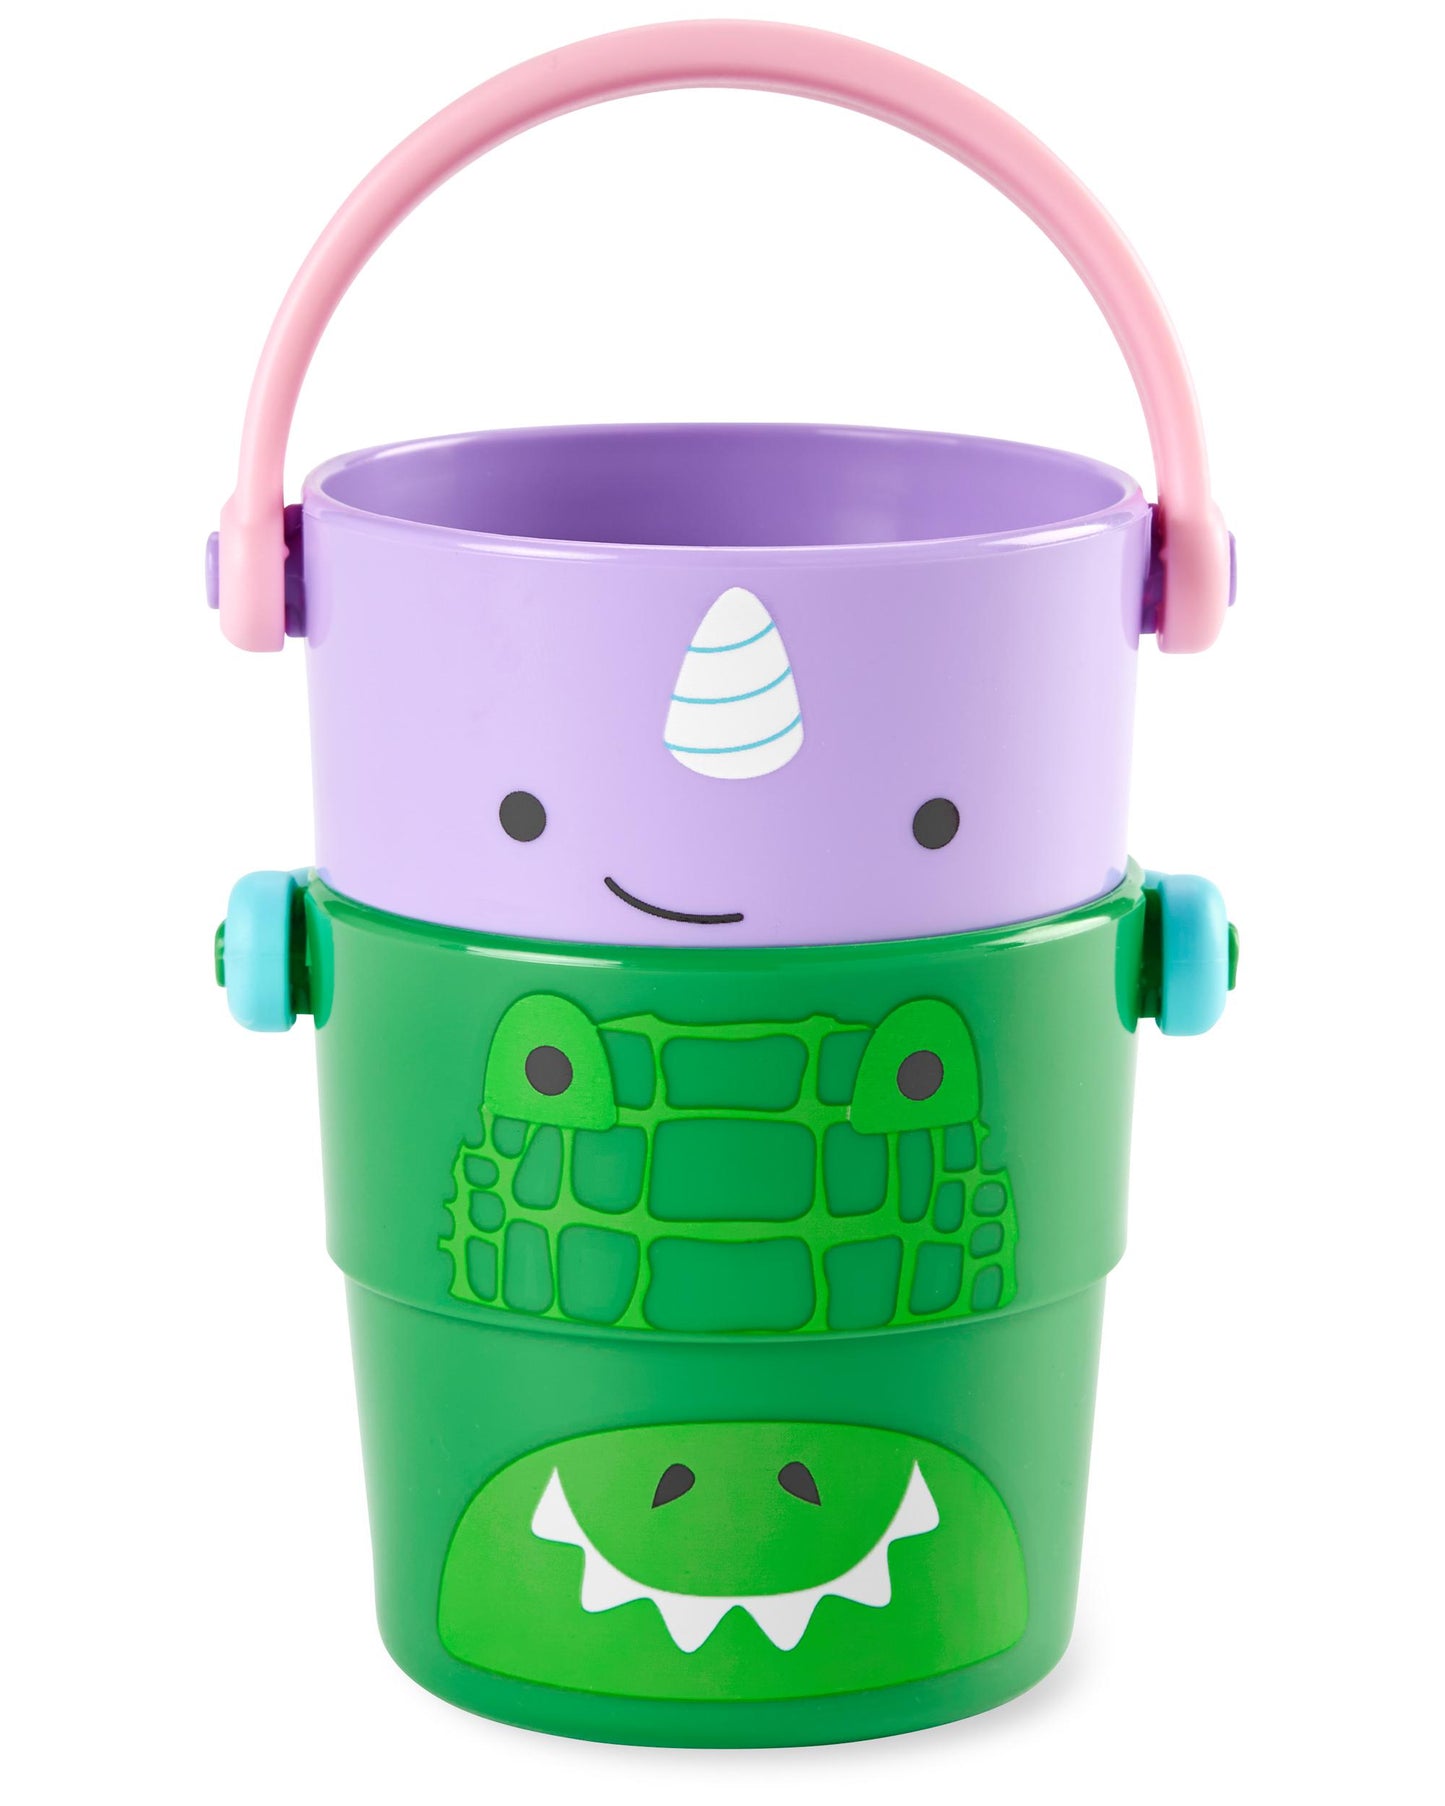 Skip Hop Zoo Stack & Pour Buckets Baby Bath Toy